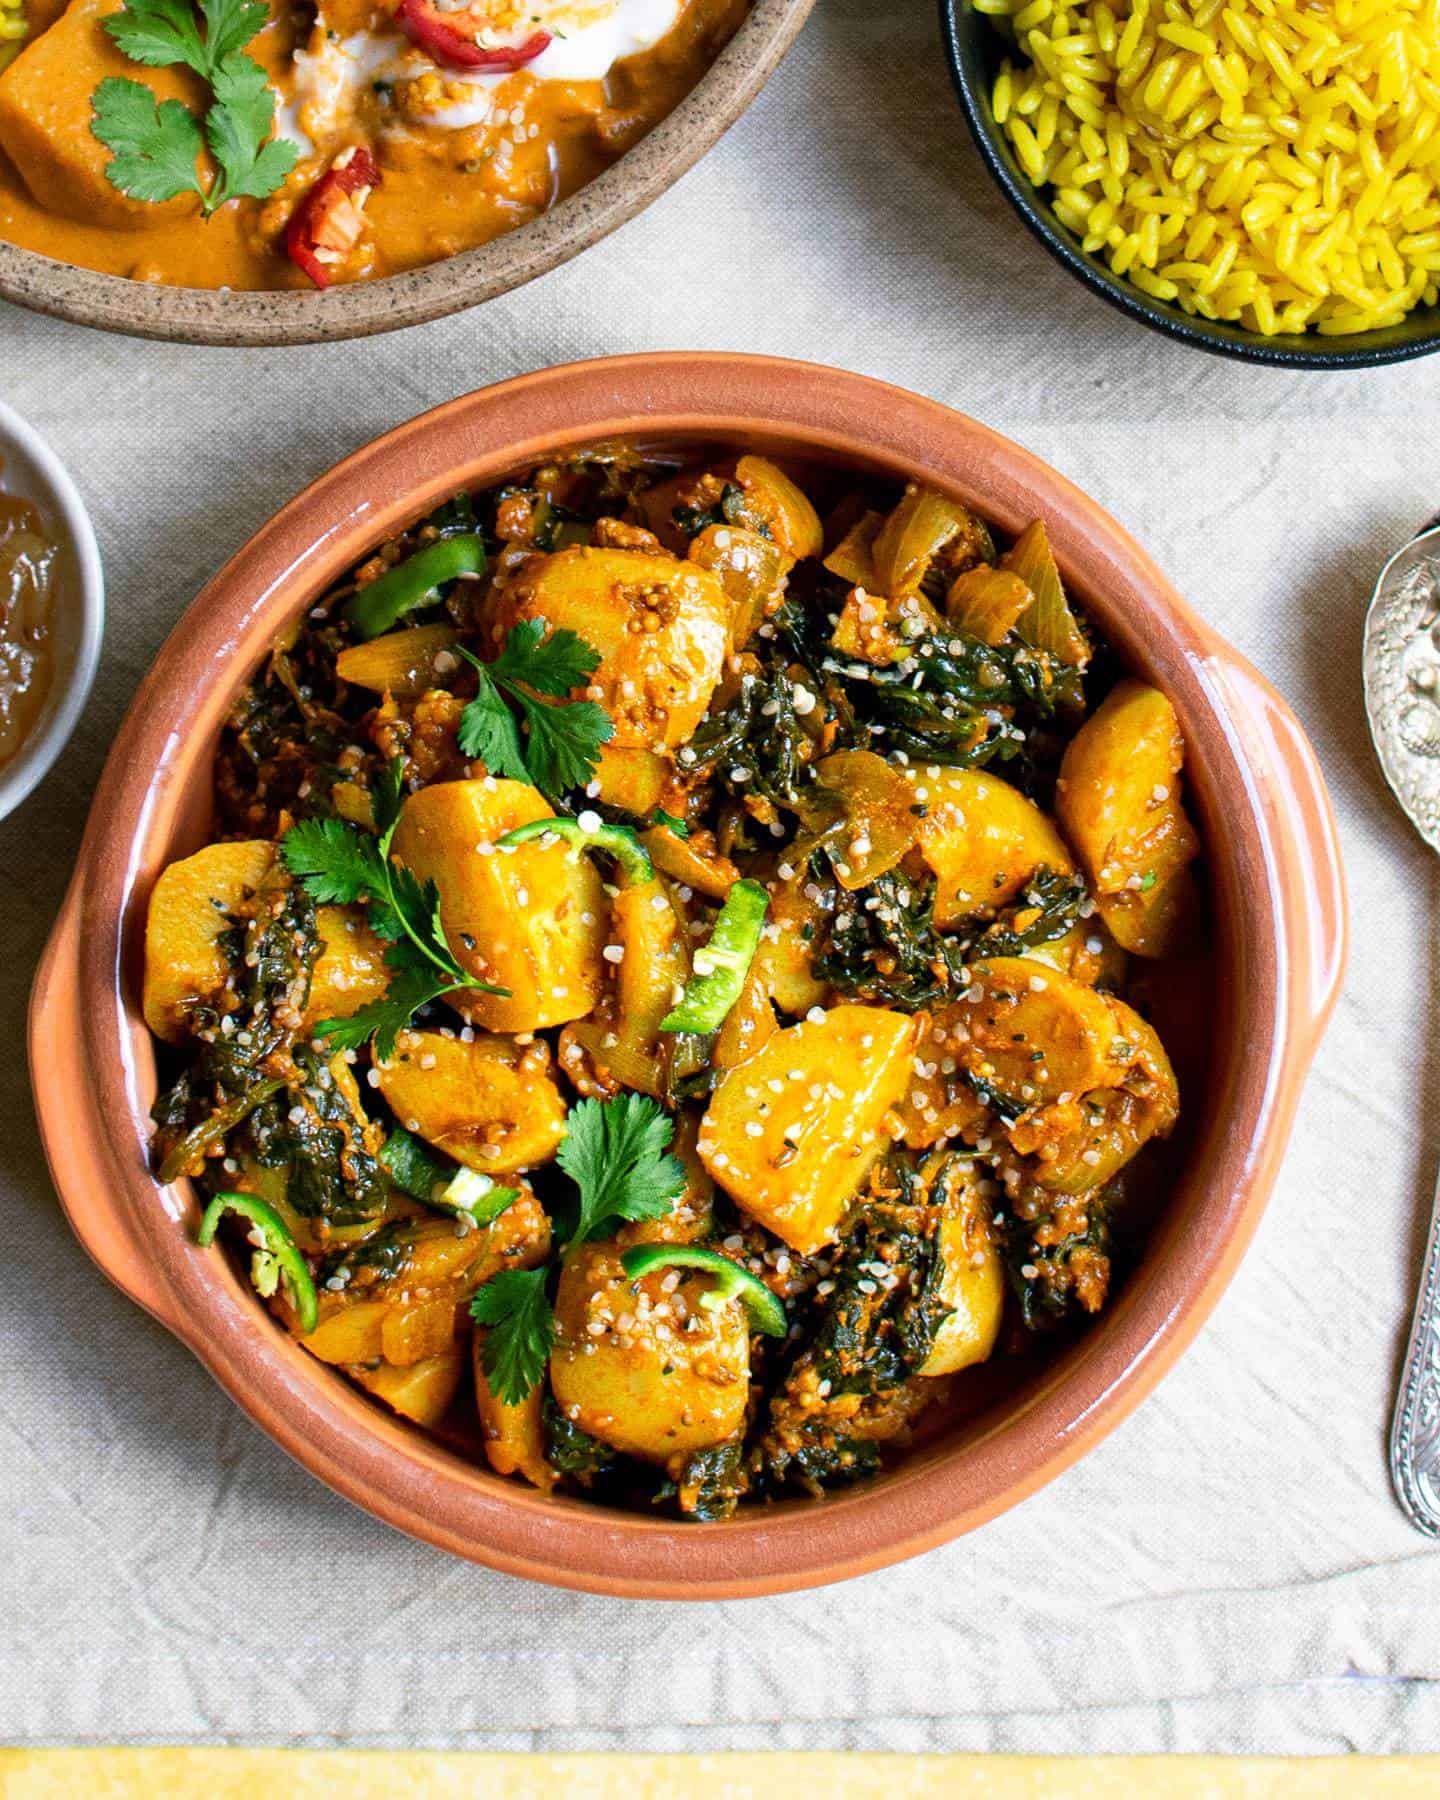 vegan Saag Aloo in a brown bowl with small indented handles, spoons to the right and other curries around it in bowls